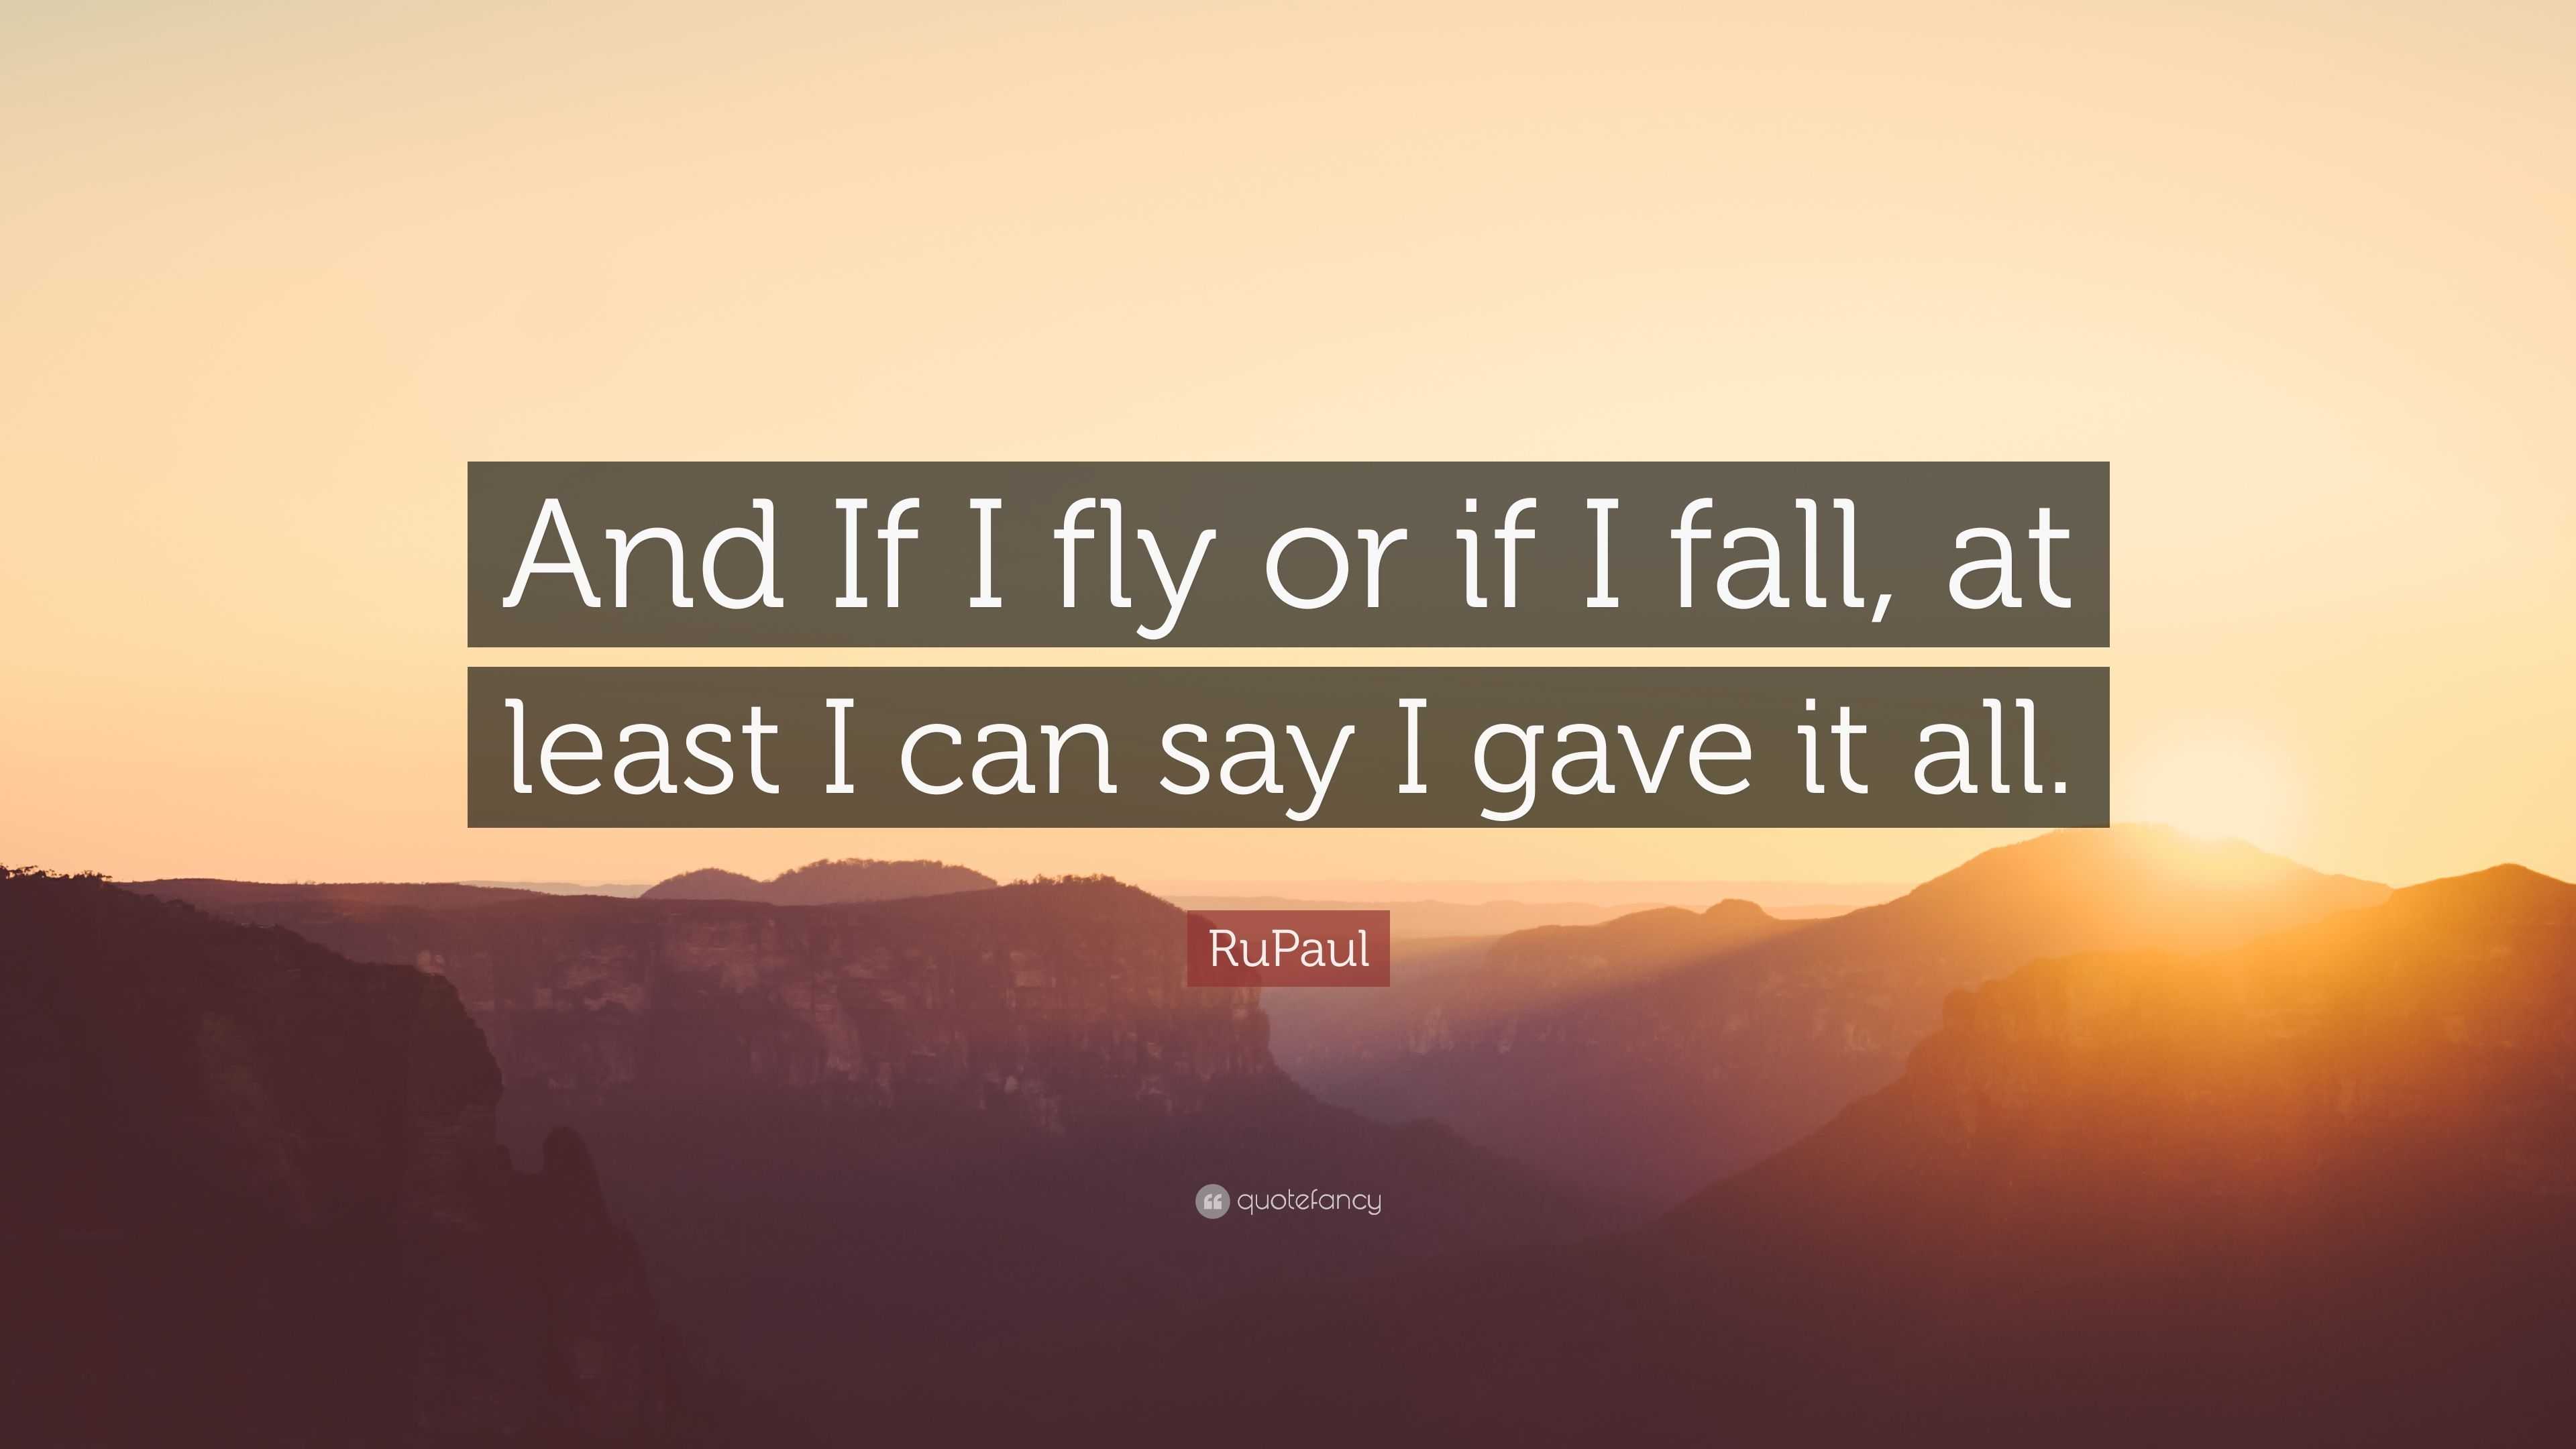 RuPaul Quote: “And If I fly or if I fall, at least I can say I gave it